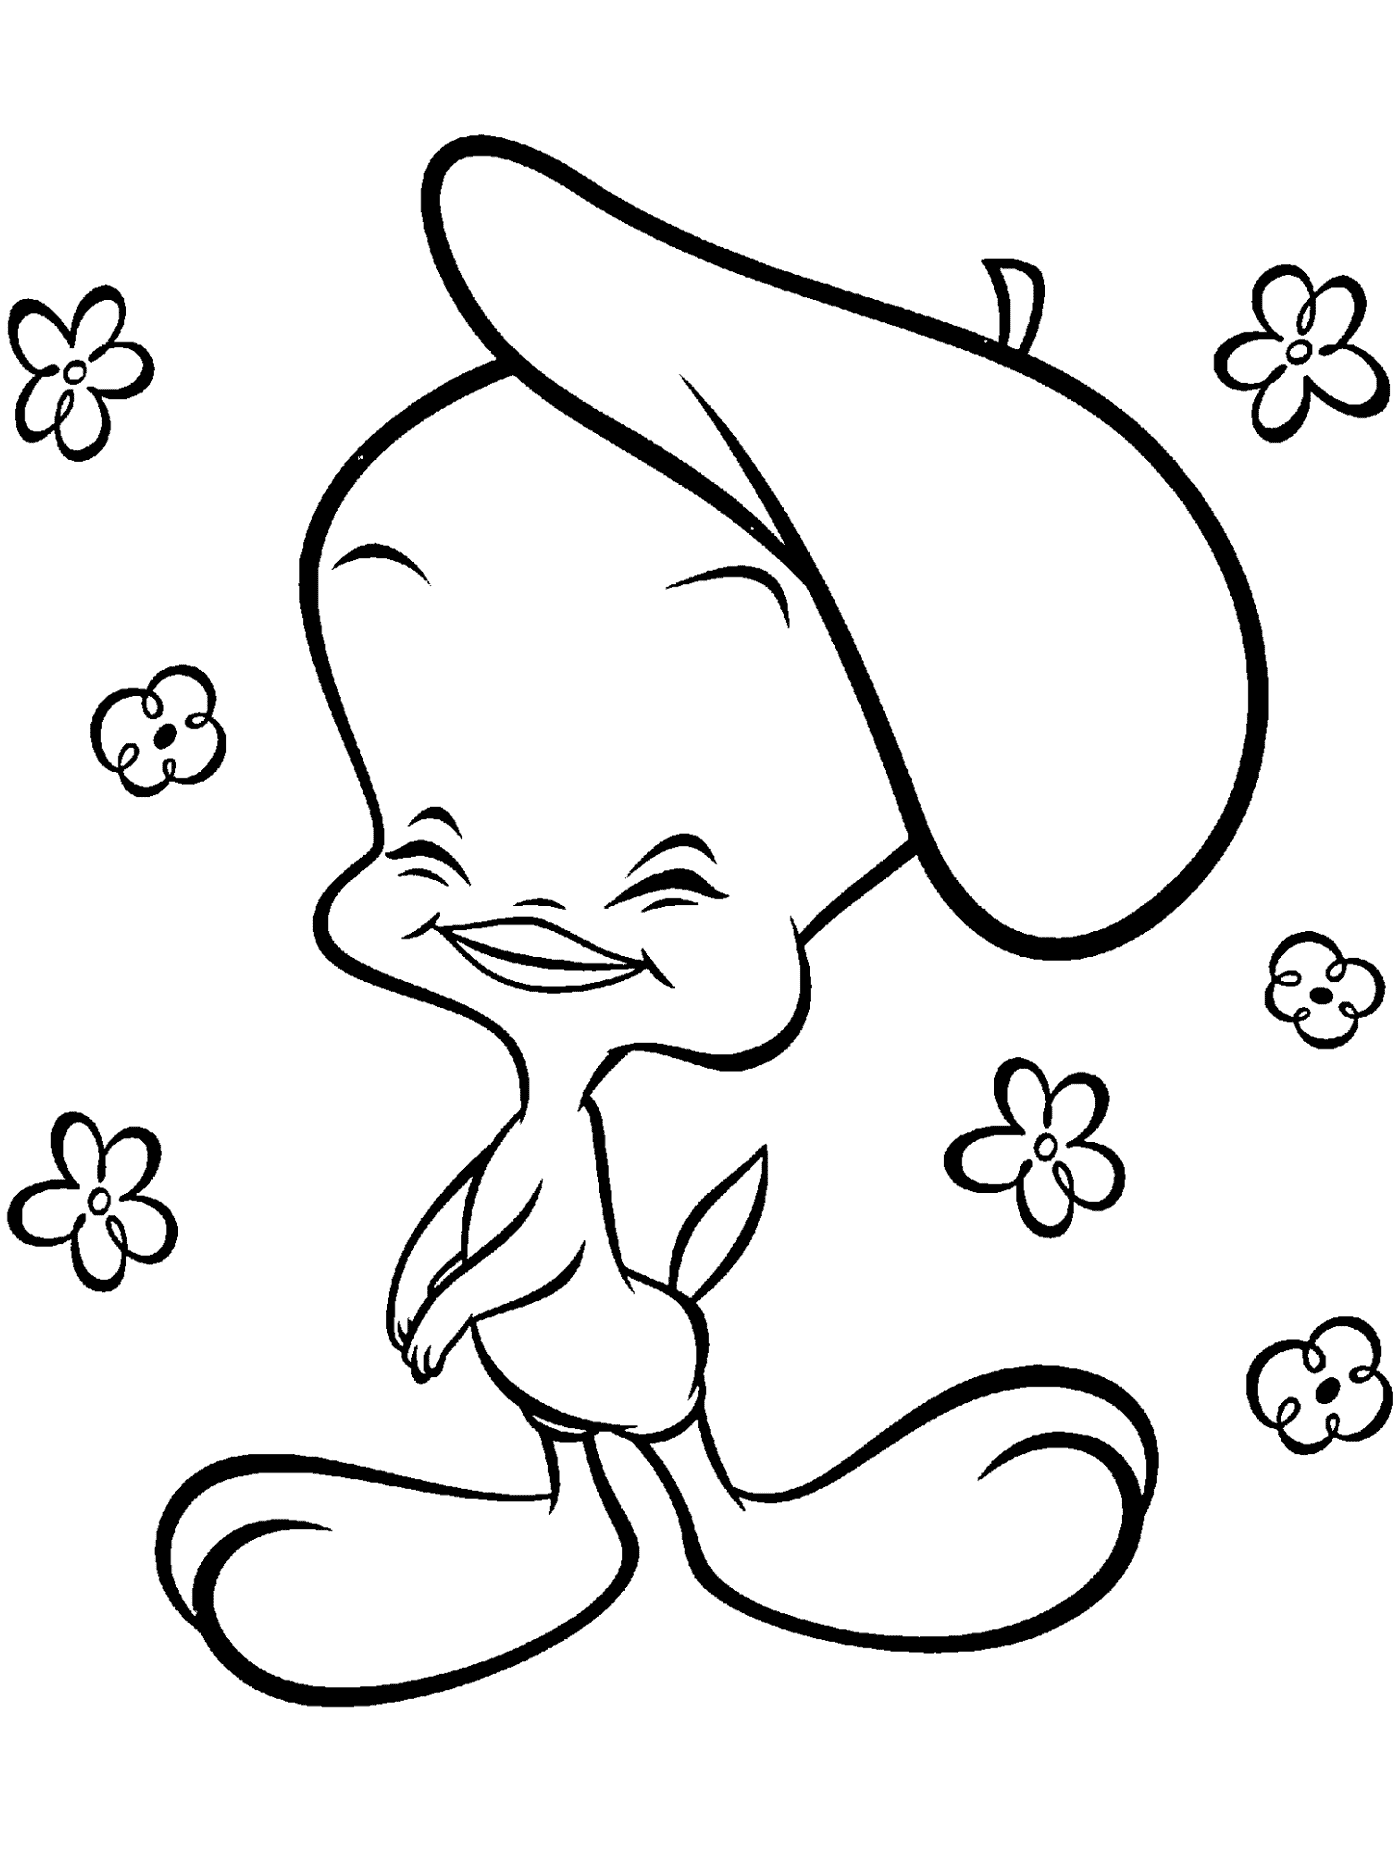 Tweety Bird Coloring page : LOONEY TUNES SPOT COLORING PAGES